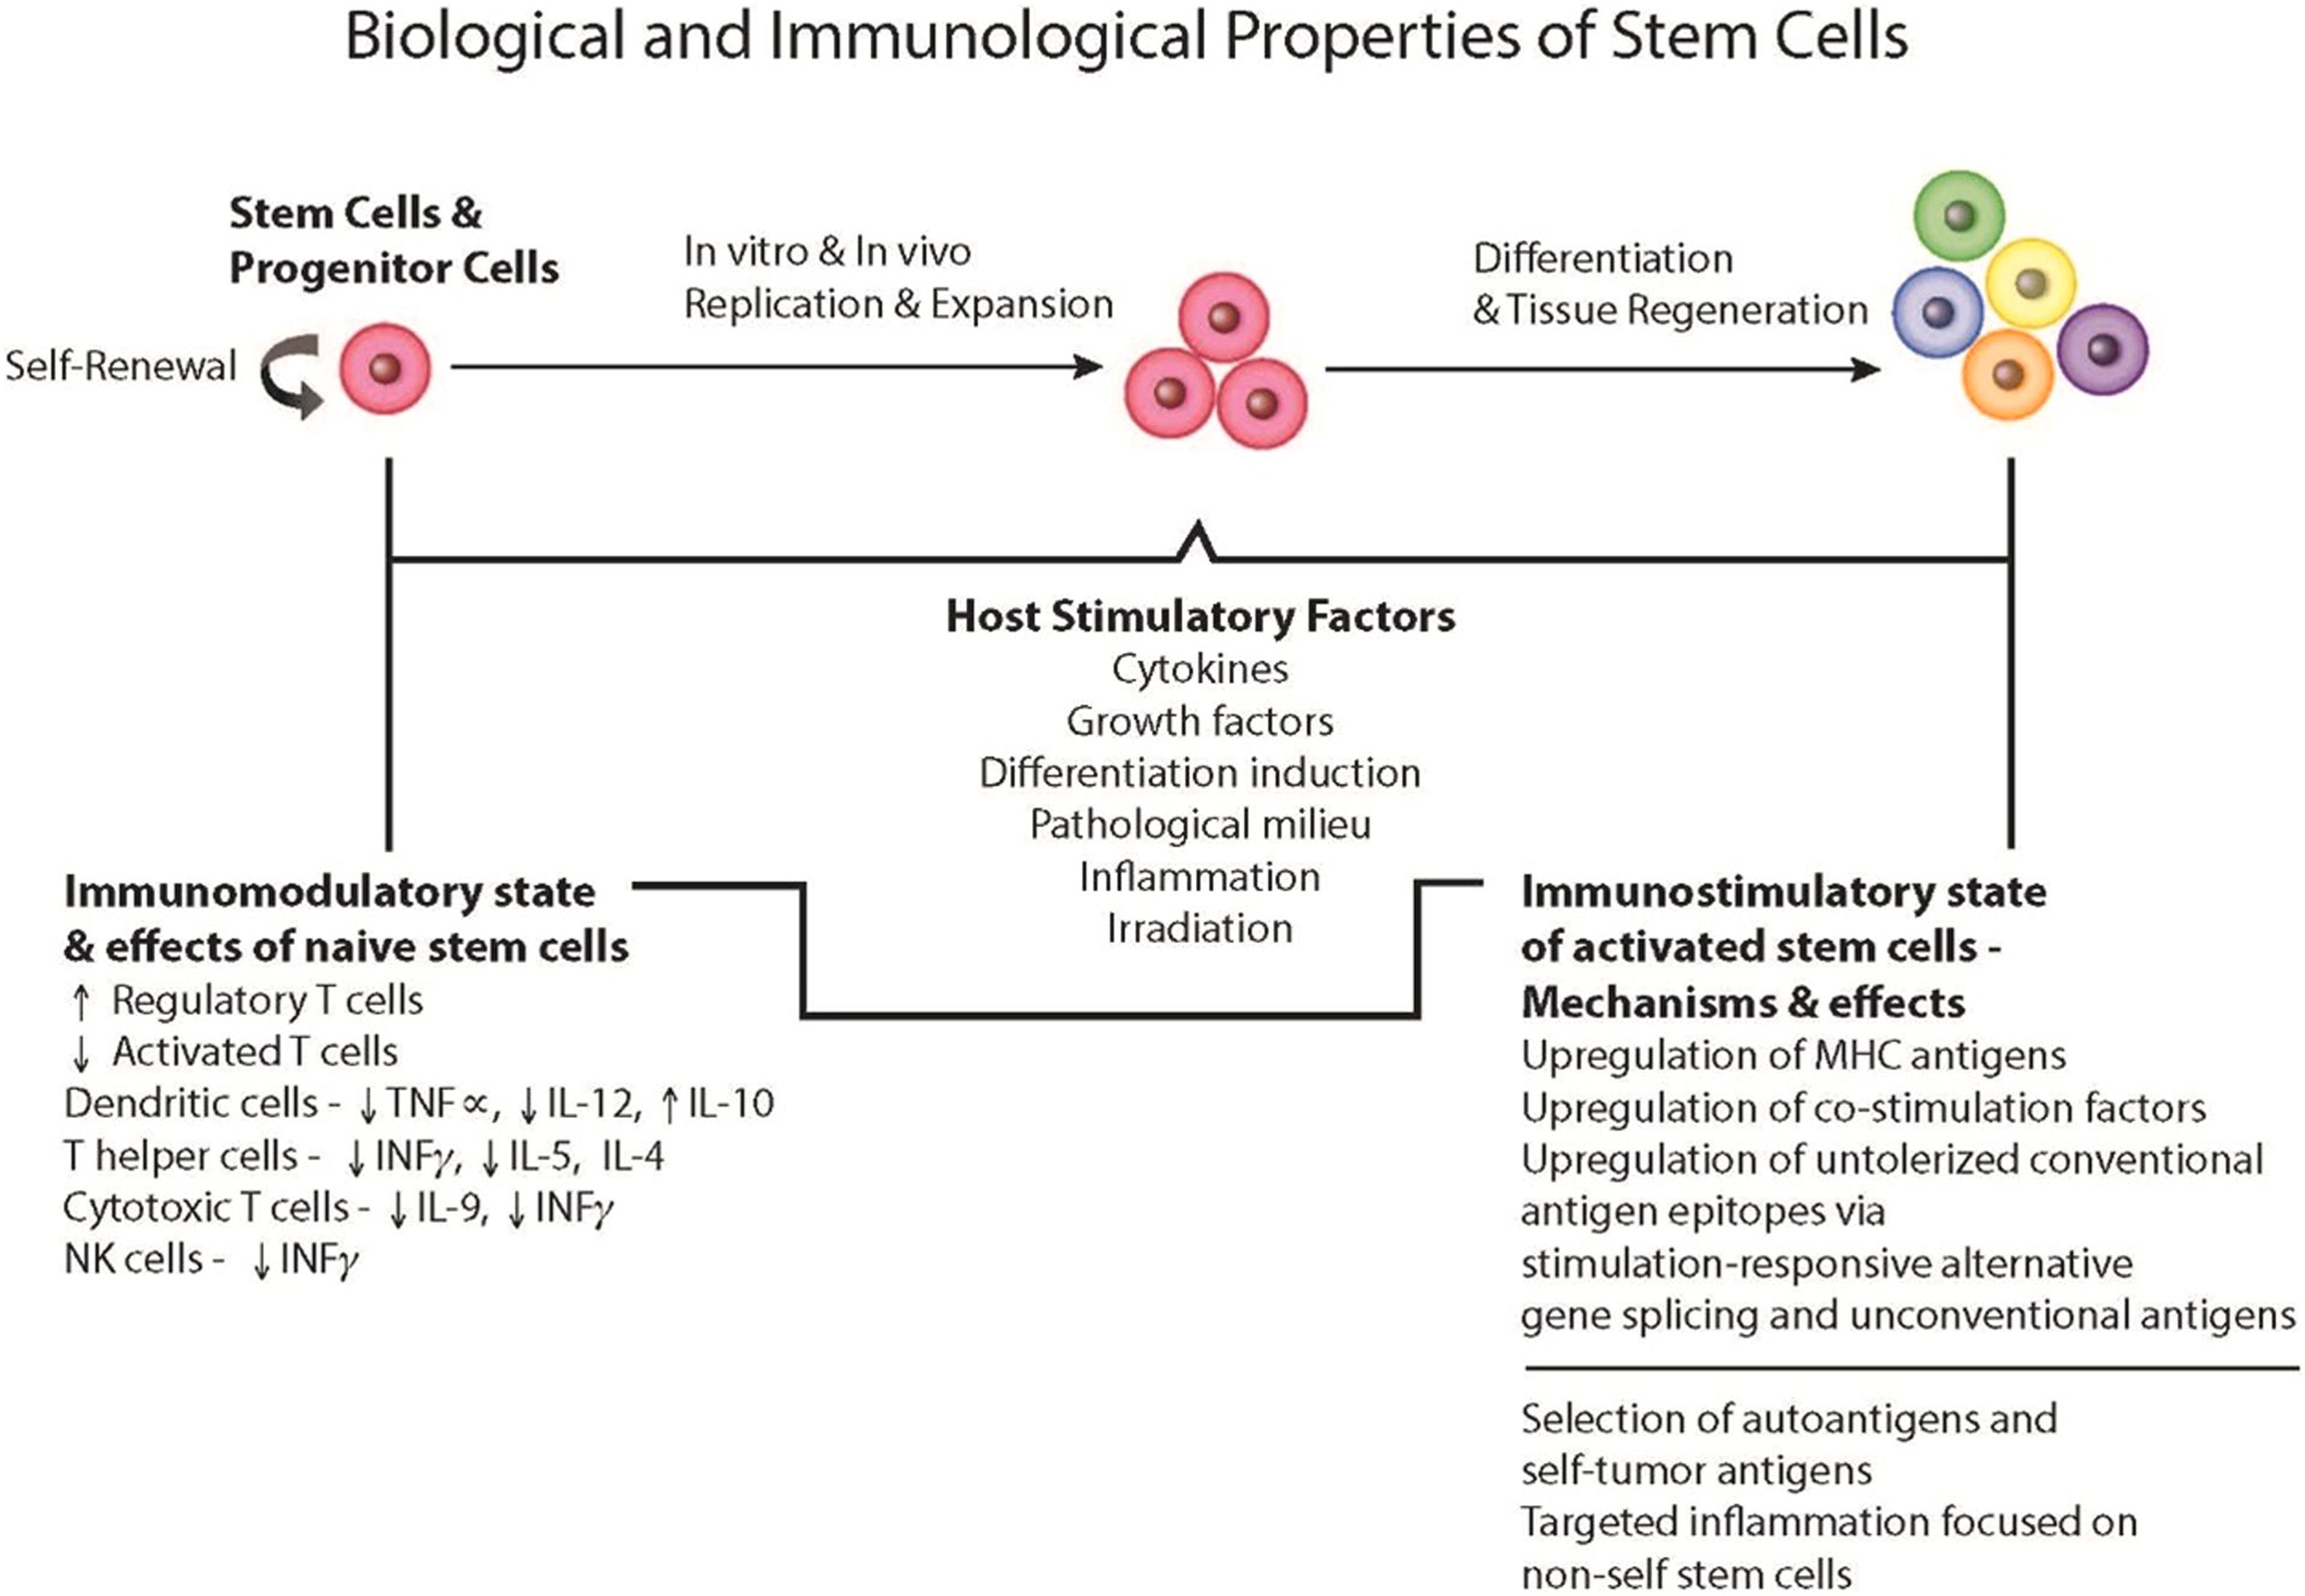 Figure 21.1, Biological and immunological properties of stem cells. General properties of stem cells include self-renewal, in vitro and in vivo replication and expansion, and in vivo differentiation and tissue regeneration. Naive embryonic stem cells and mesenchymal stem cells function to modulate and dampen the native and acquired immune responses of the host through cytokine-mediated interactions with various populations of lymphocytes (B cells, T helper cells, cytotoxic T cells, and natural killer [NK] cells) and dendritic cells and macrophages. Stem cells also respond to perturbations of the host by proliferation and differentiation, which may result in tissue repair and regeneration. Concomitantly, stem cells are exposed to several host factors leading to their activation. In the process, the phenotype and functional properties of the stem cells are changed, as mediated and manifested by upregulation of major histocompatibility complex (MHC) class I and II molecules, costimulation factors, and conventional antigen epitopes via alternative gene splicing. One consequence is that the stem cells undergo stimulation-responsive splicing for the selection of autoantigens and self-tumor antigens. However, if the stem cells are nonself (allogeneic or xenogeneic), they also become subject to targeted immune and inflammatory responses by the host. IL , interleukin; INF , interferon; TNF , tumor necrosis factor.